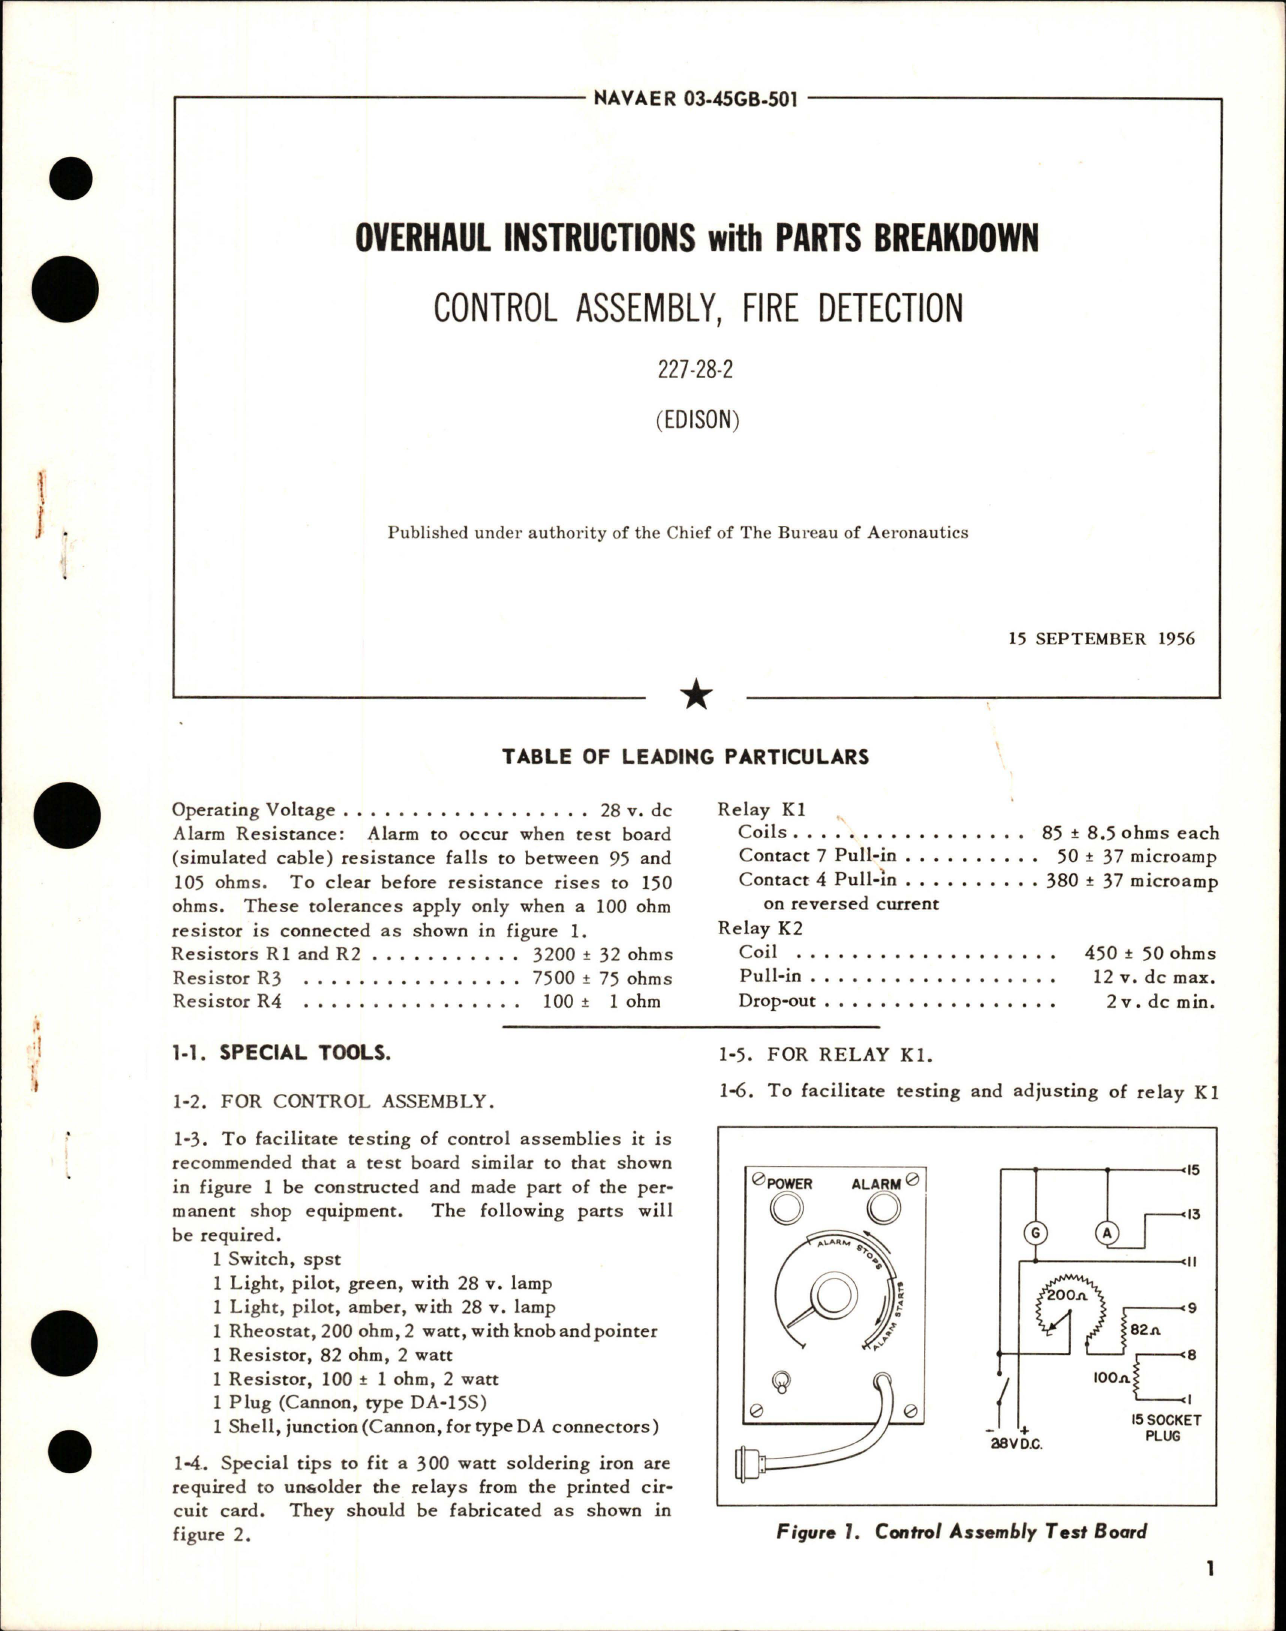 Sample page 1 from AirCorps Library document: Overhaul Instructions with Parts Breakdown for Fire Detection Control Assembly - 227-28-2 